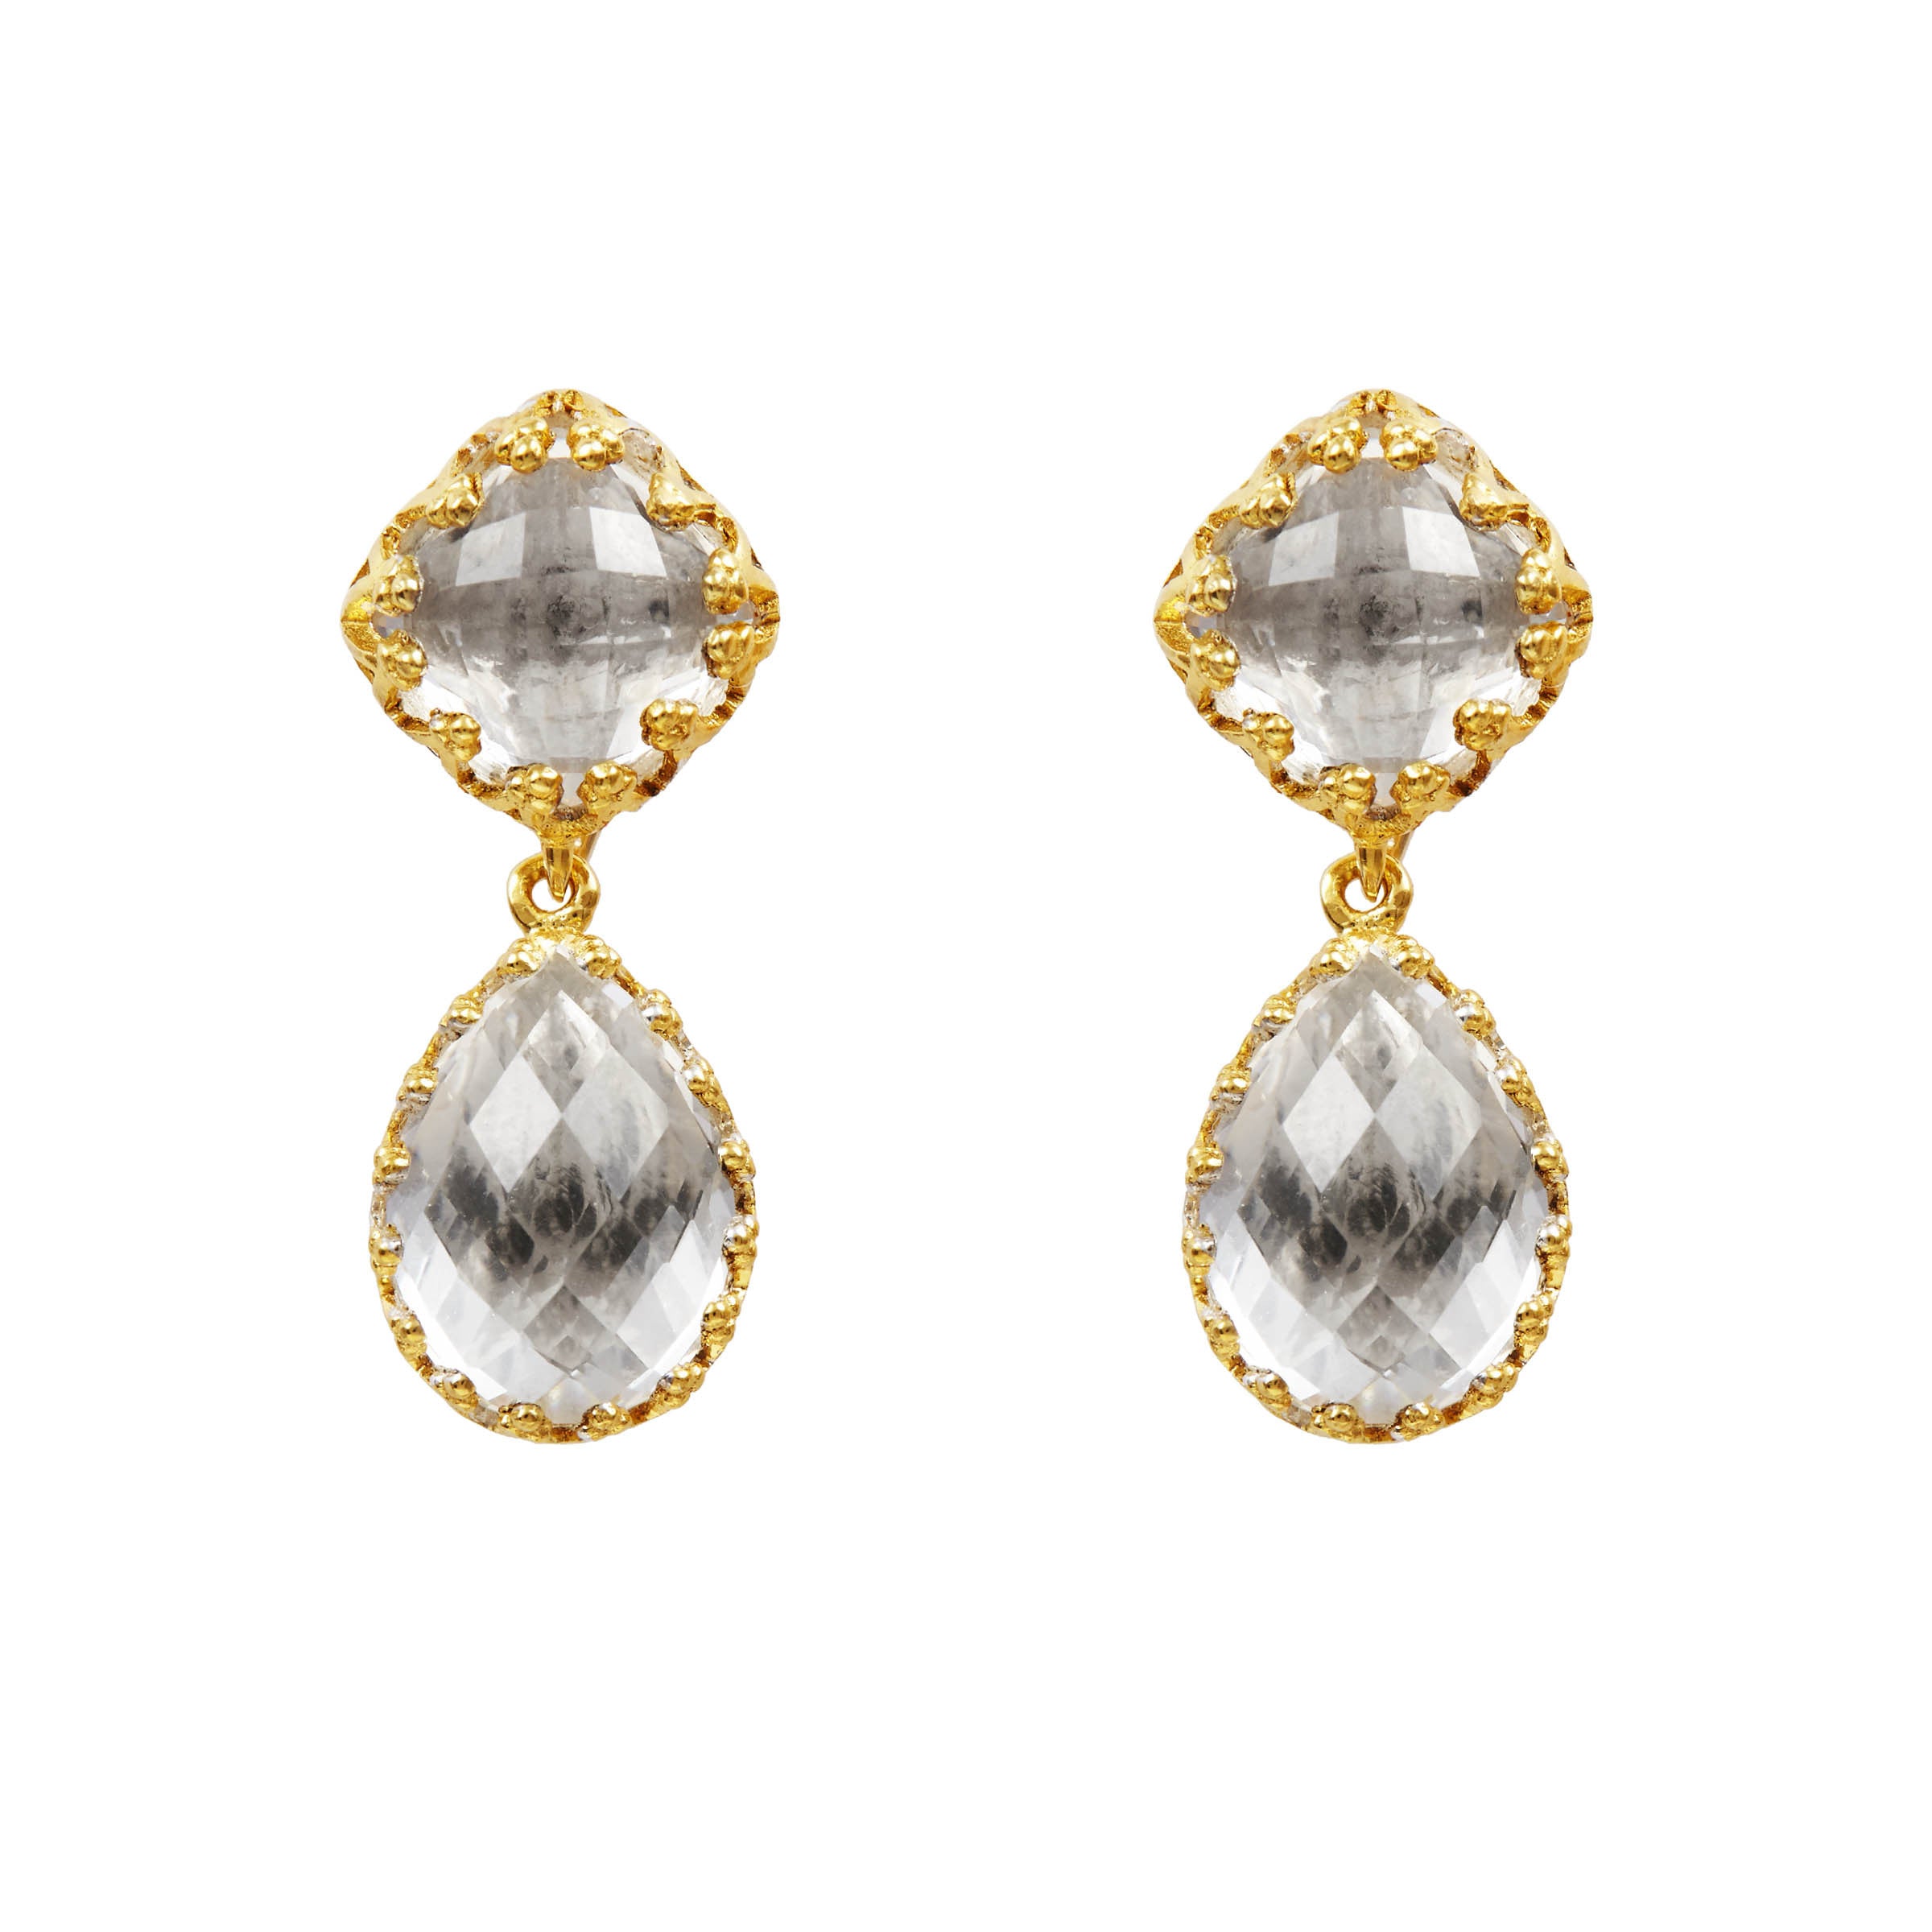 Jane Small Day Night Earrings (Black Rhodium or Yellow Gold Wash)